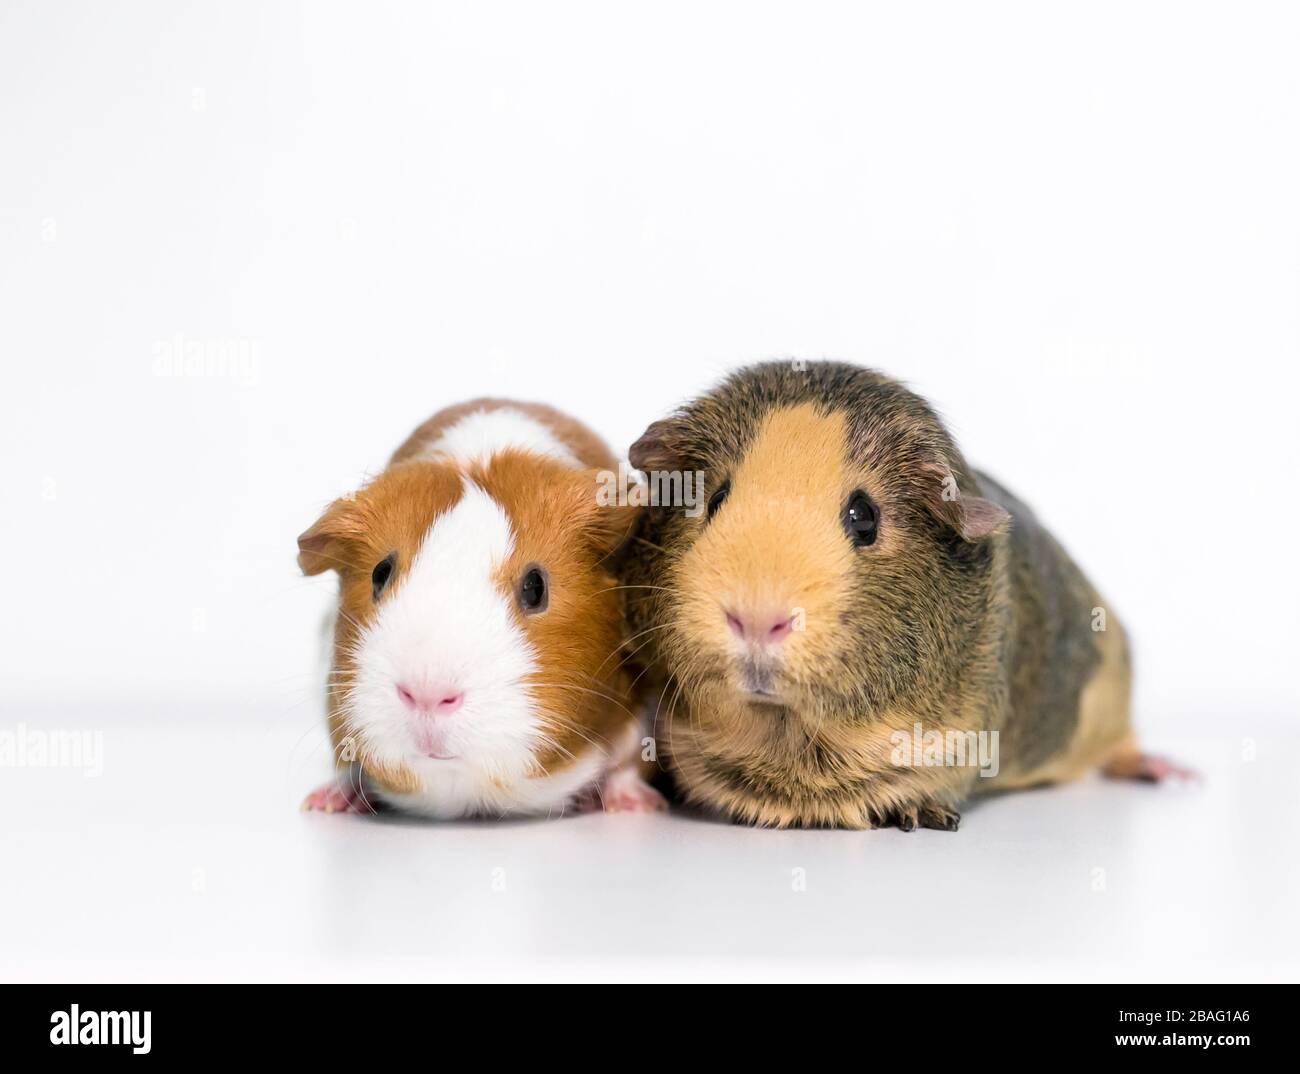 Two American Guinea Pigs (Cavia porcellus) together on a white background Stock Photo